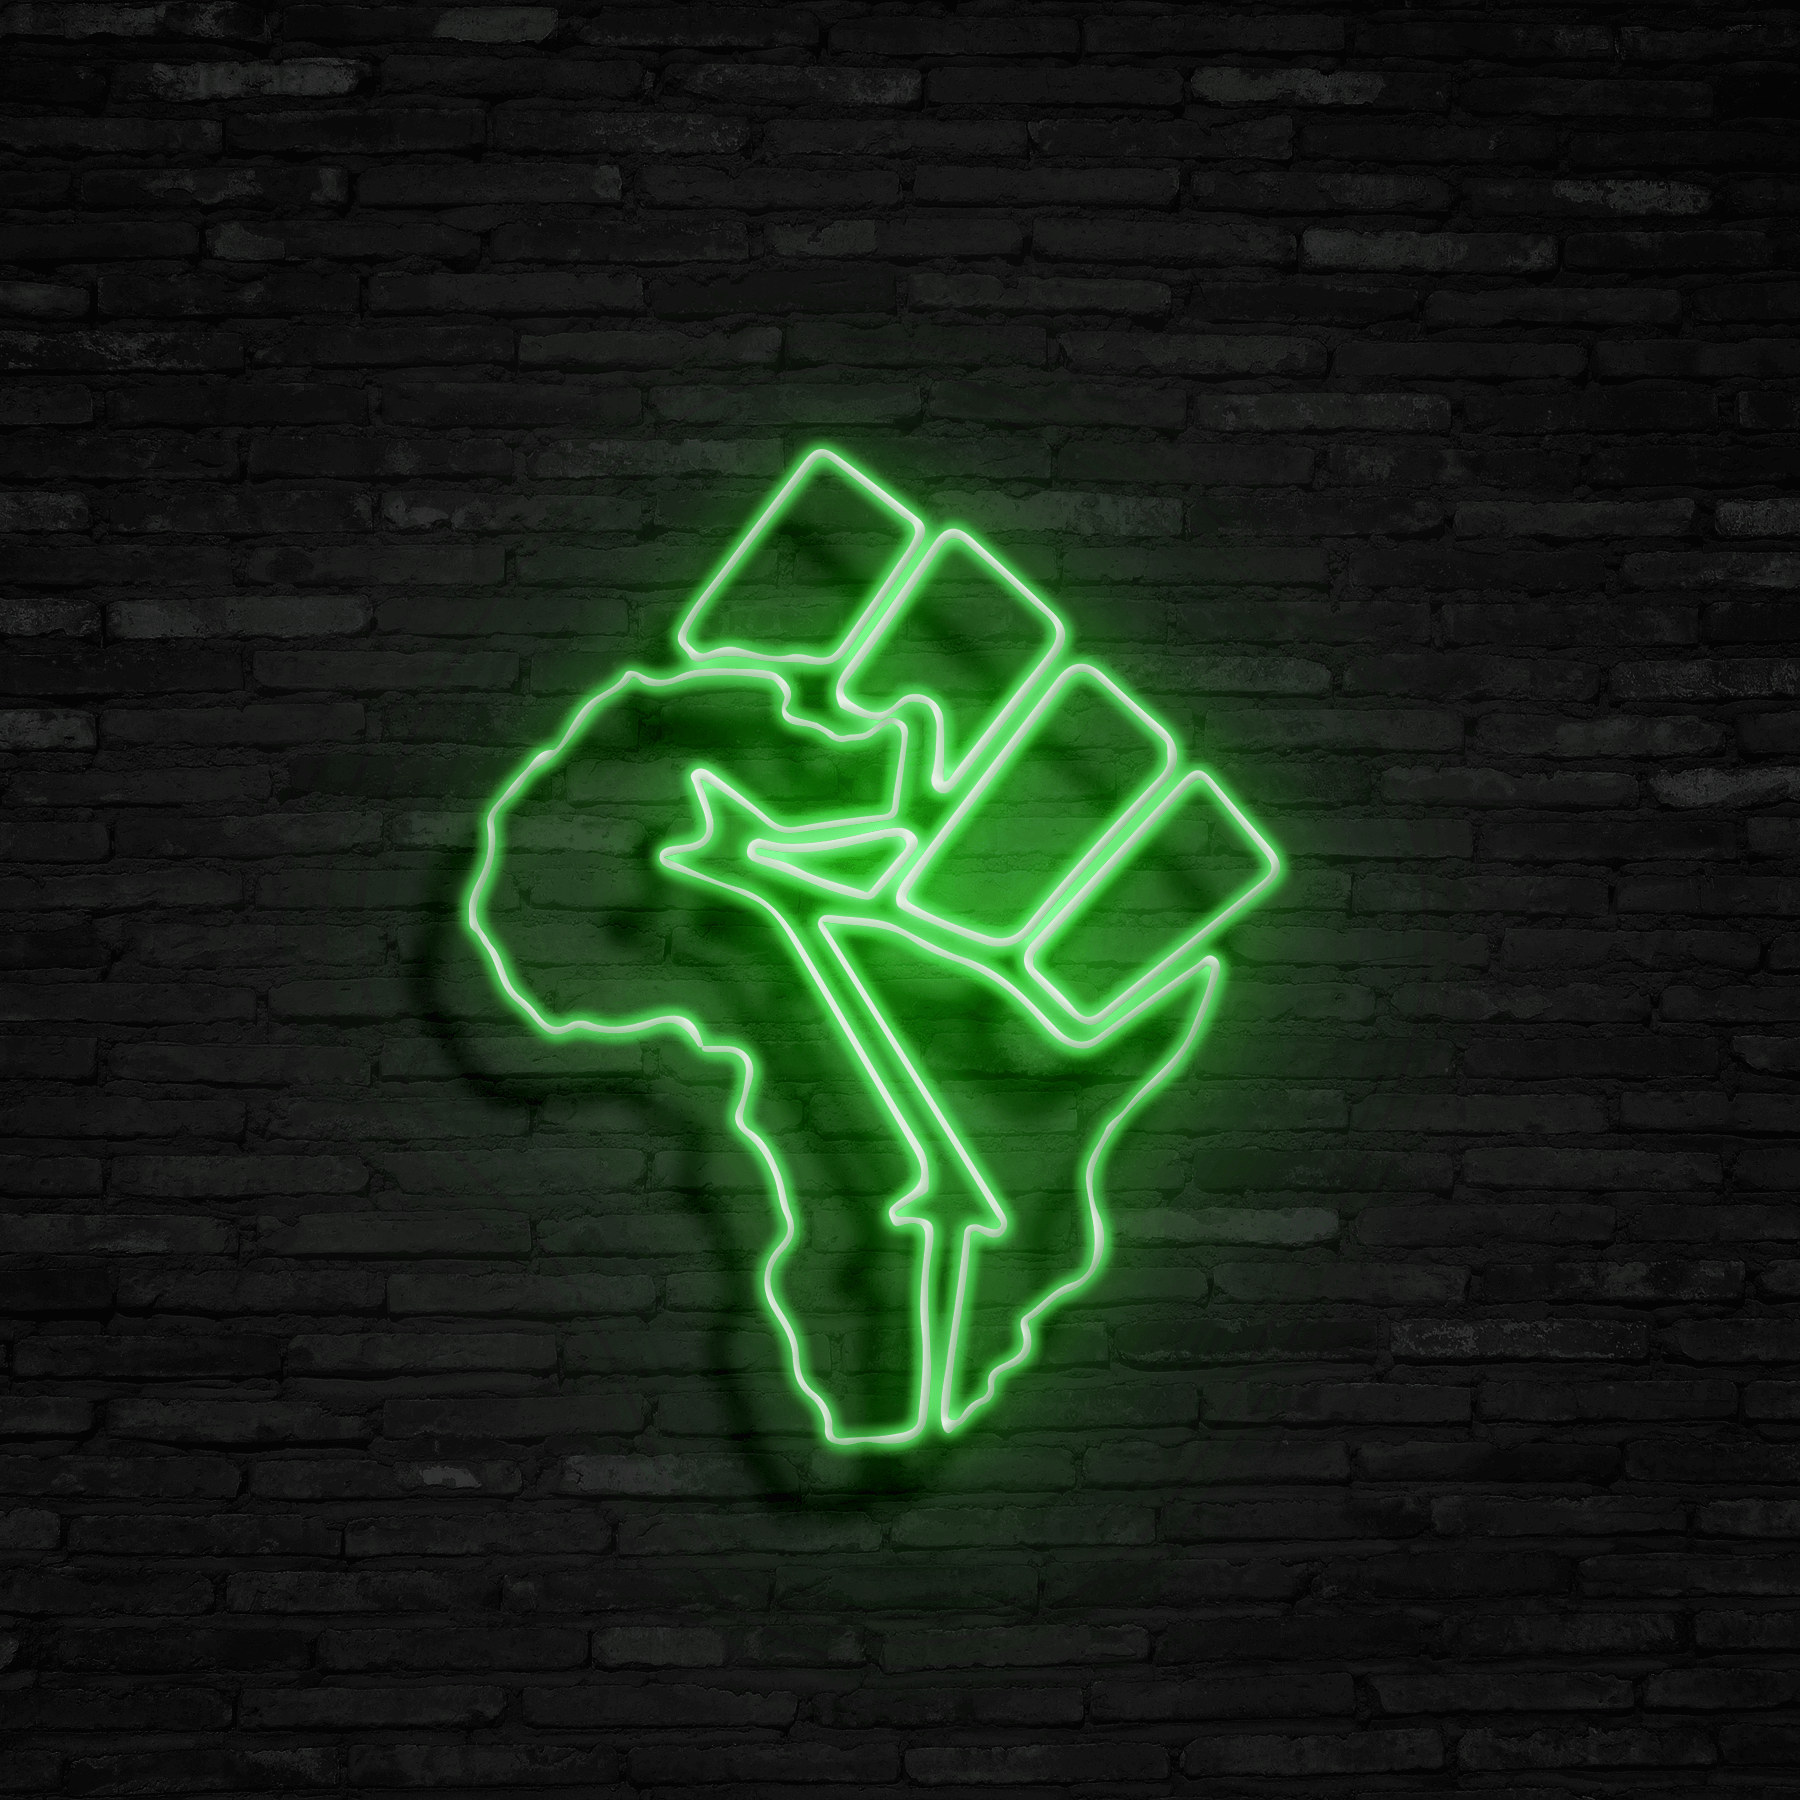 A neon sign of an afro hand with fist - Neon green